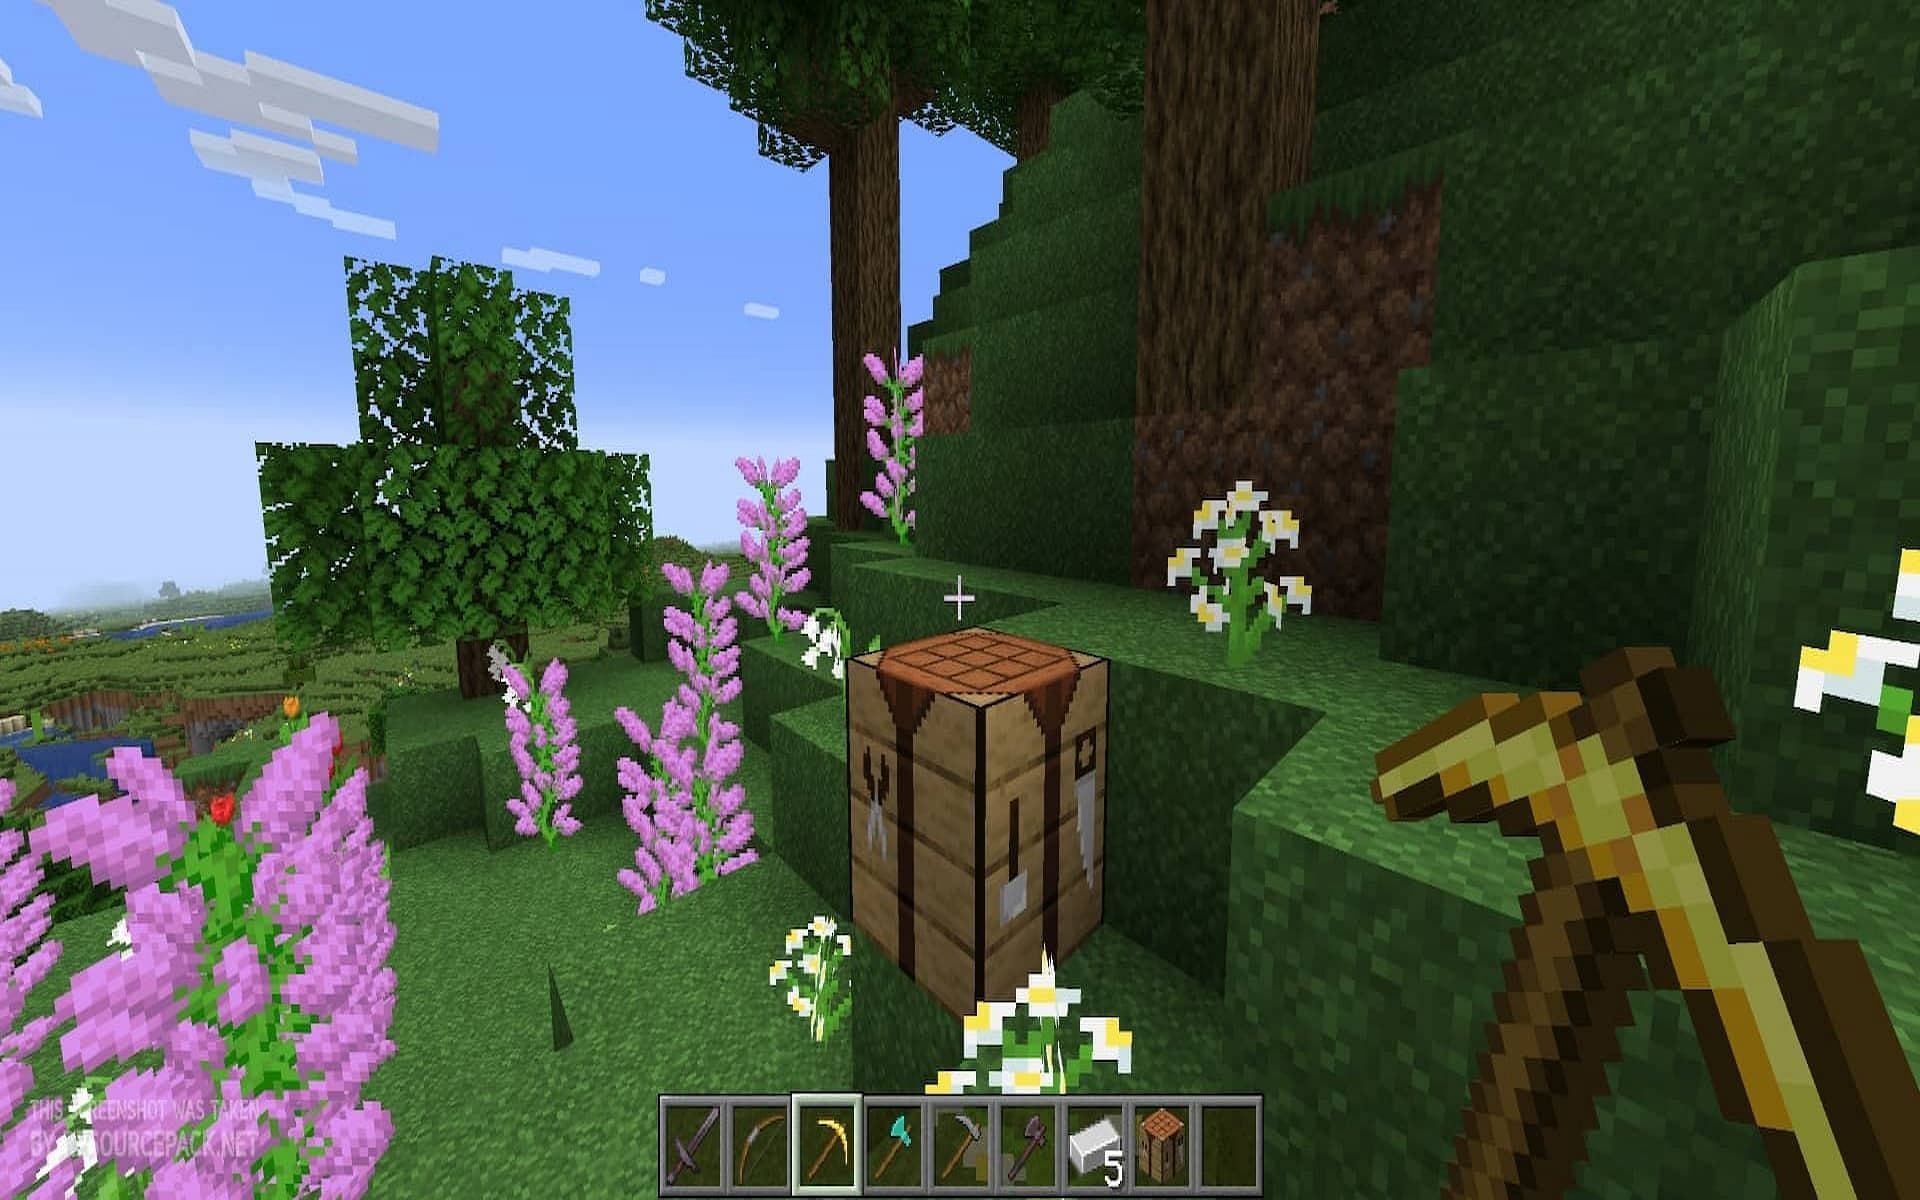 Players can change how their game looks easily with texture packs (Image via MinecraftResourcePacks.com)